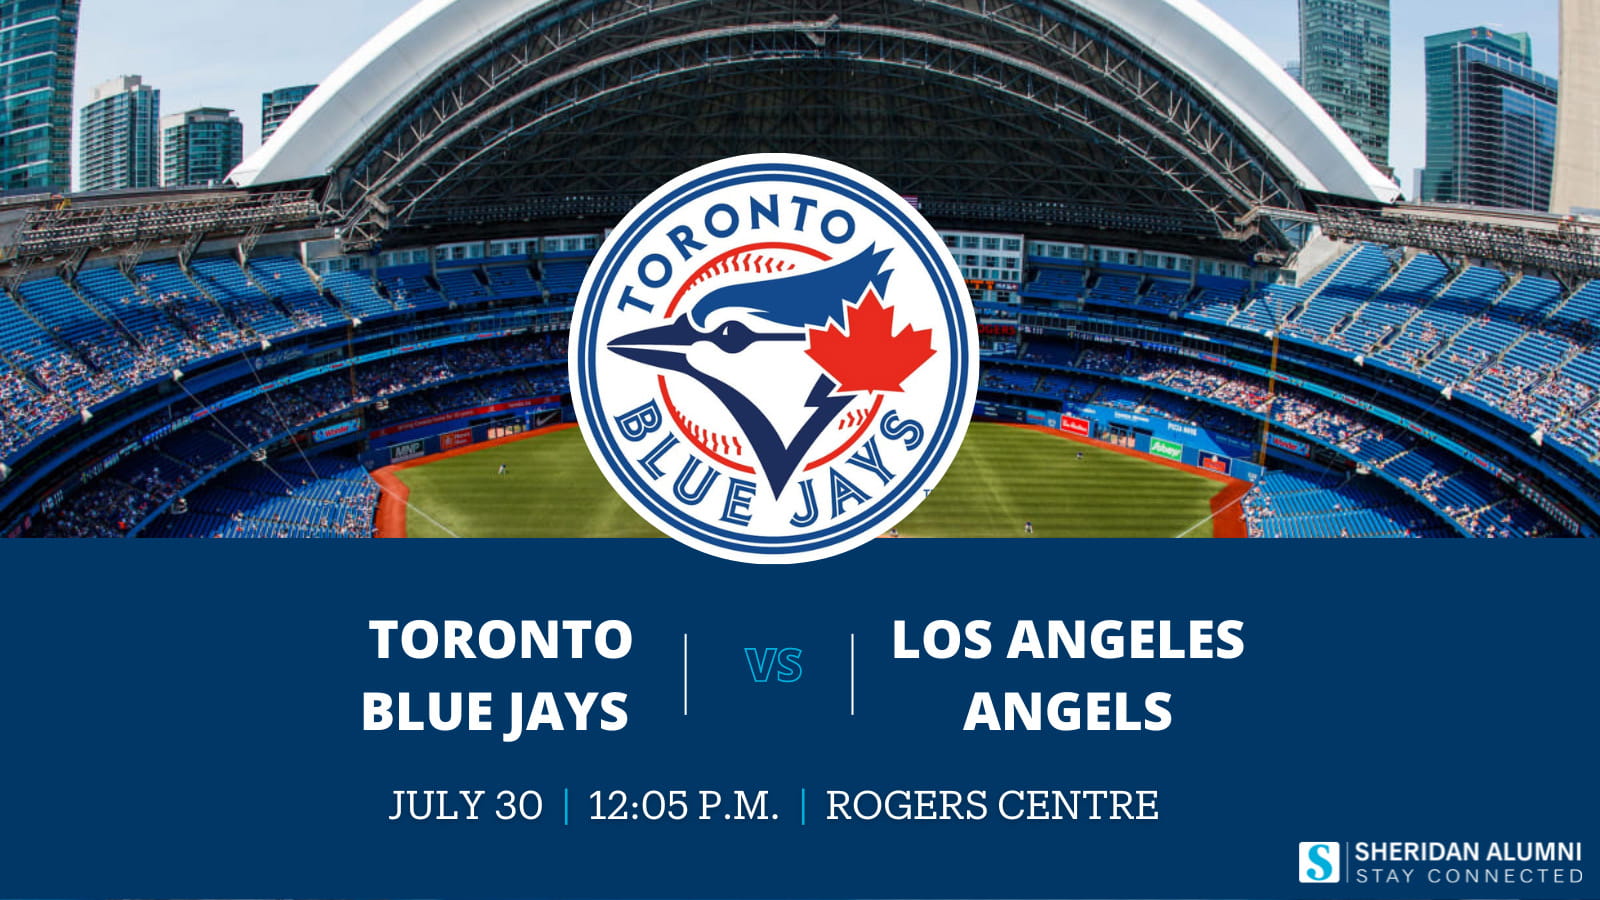 Toronto Blue Jays vs Los Angeles Angels | July 30 | 12:05 p.m. | Rogers Centre | Sheridan Alumni | Stay Connected